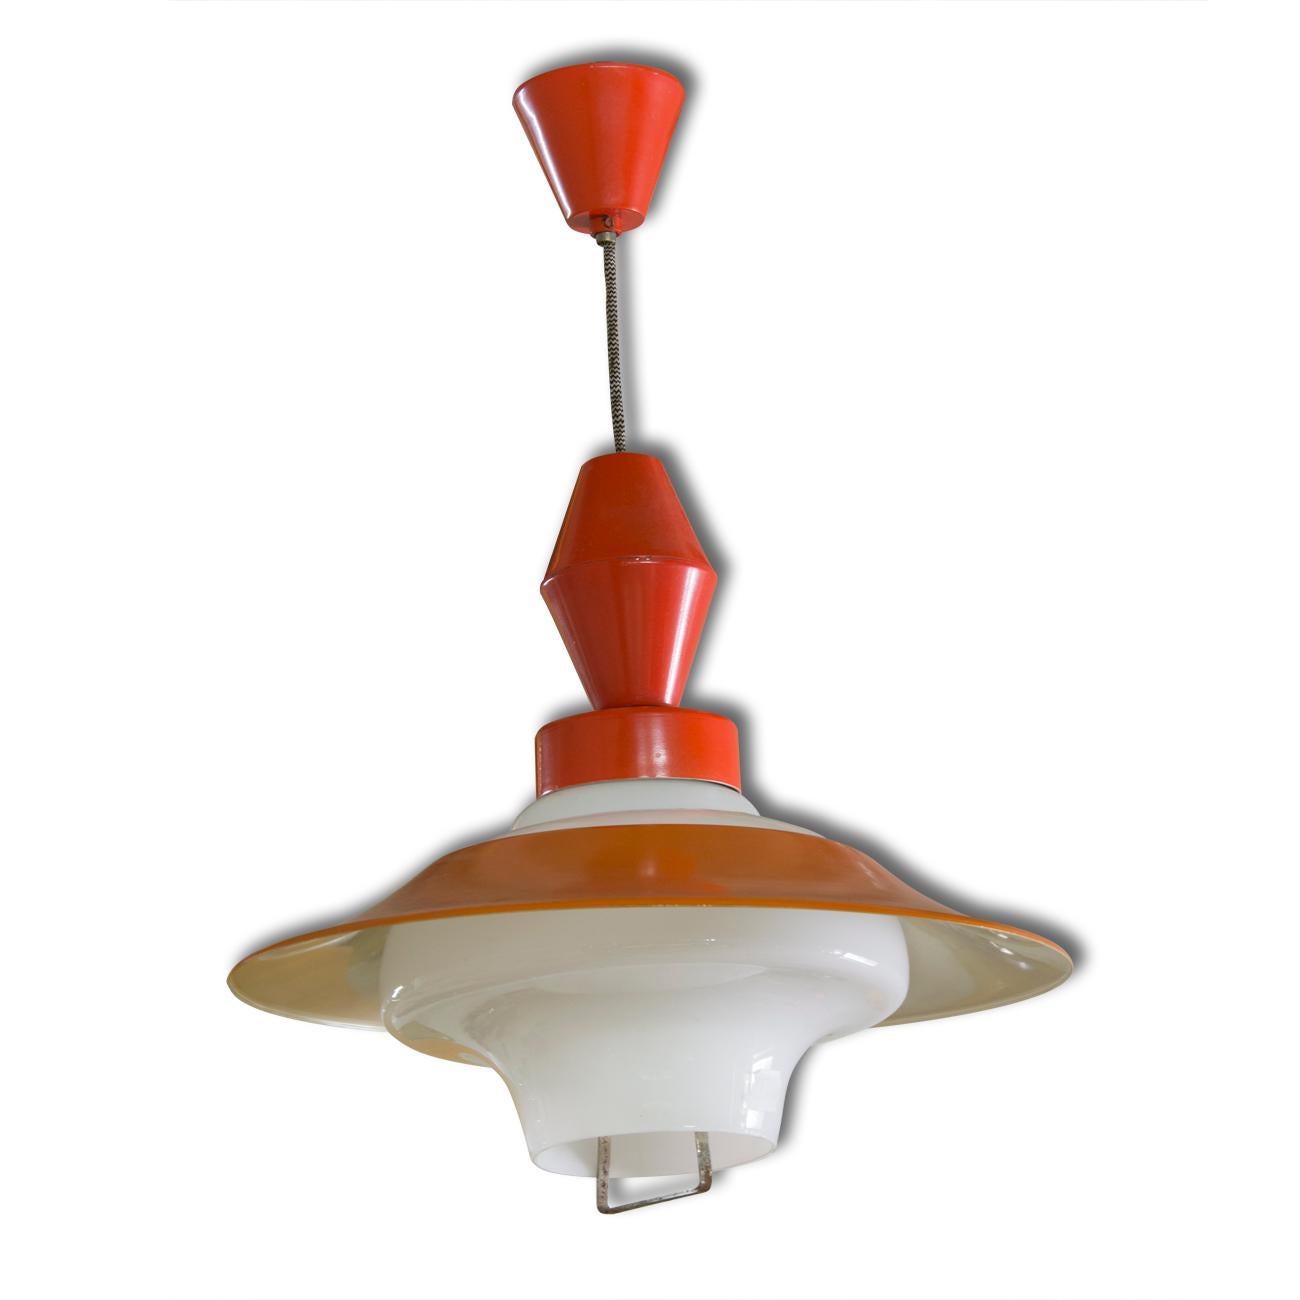 A vintage midcentury pendant light, made in Czechoslovakia in 1960s. In red with a white interior. Material: milky glass, metal, sheet metal. In good Vintage condition, consistent with age and use. New wiring. 


 